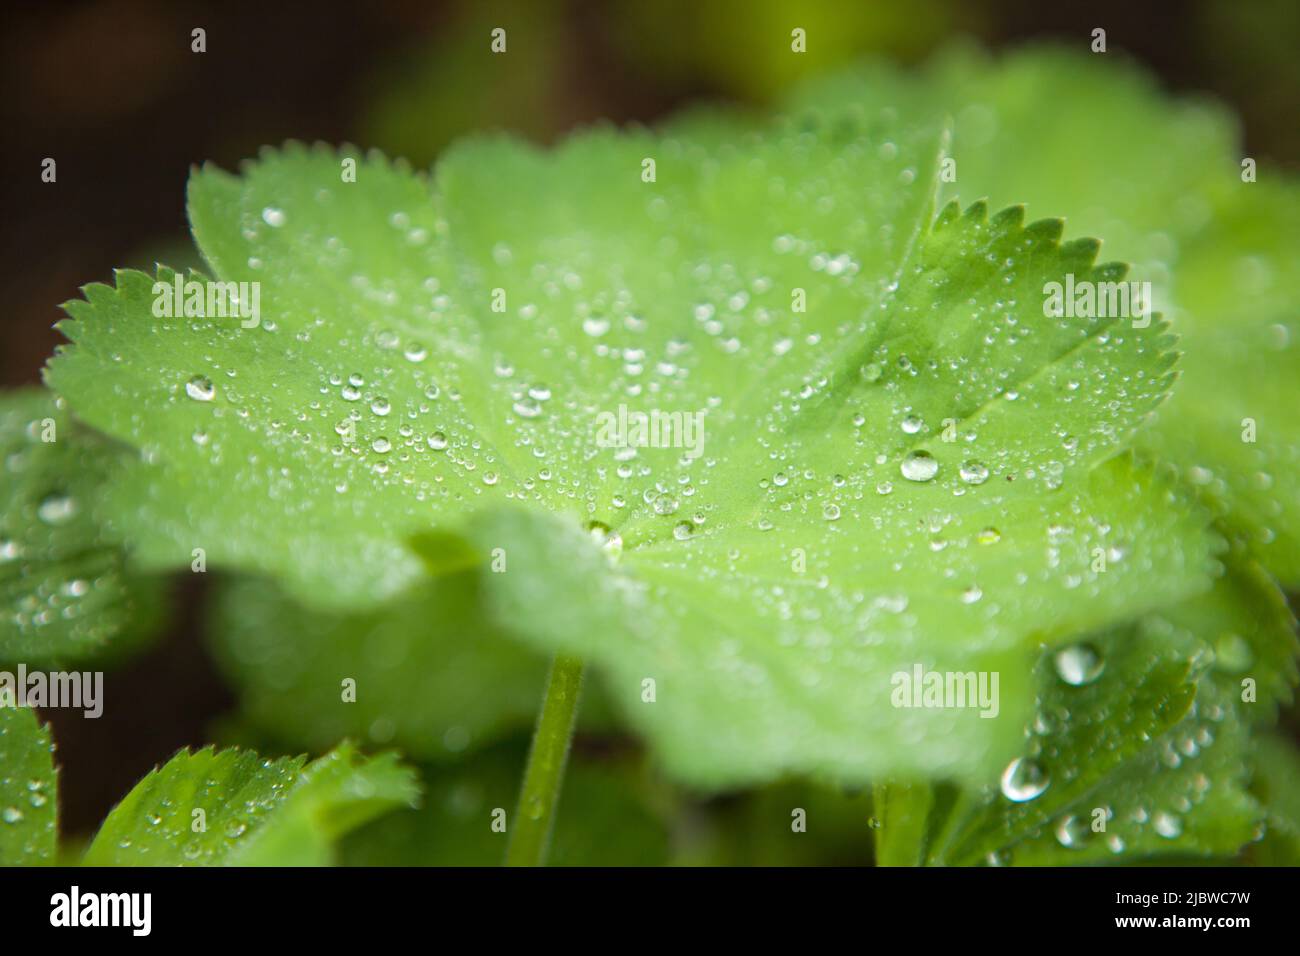 lady-s mantles plant - green leaf with water drops or raindrops Stock Photo